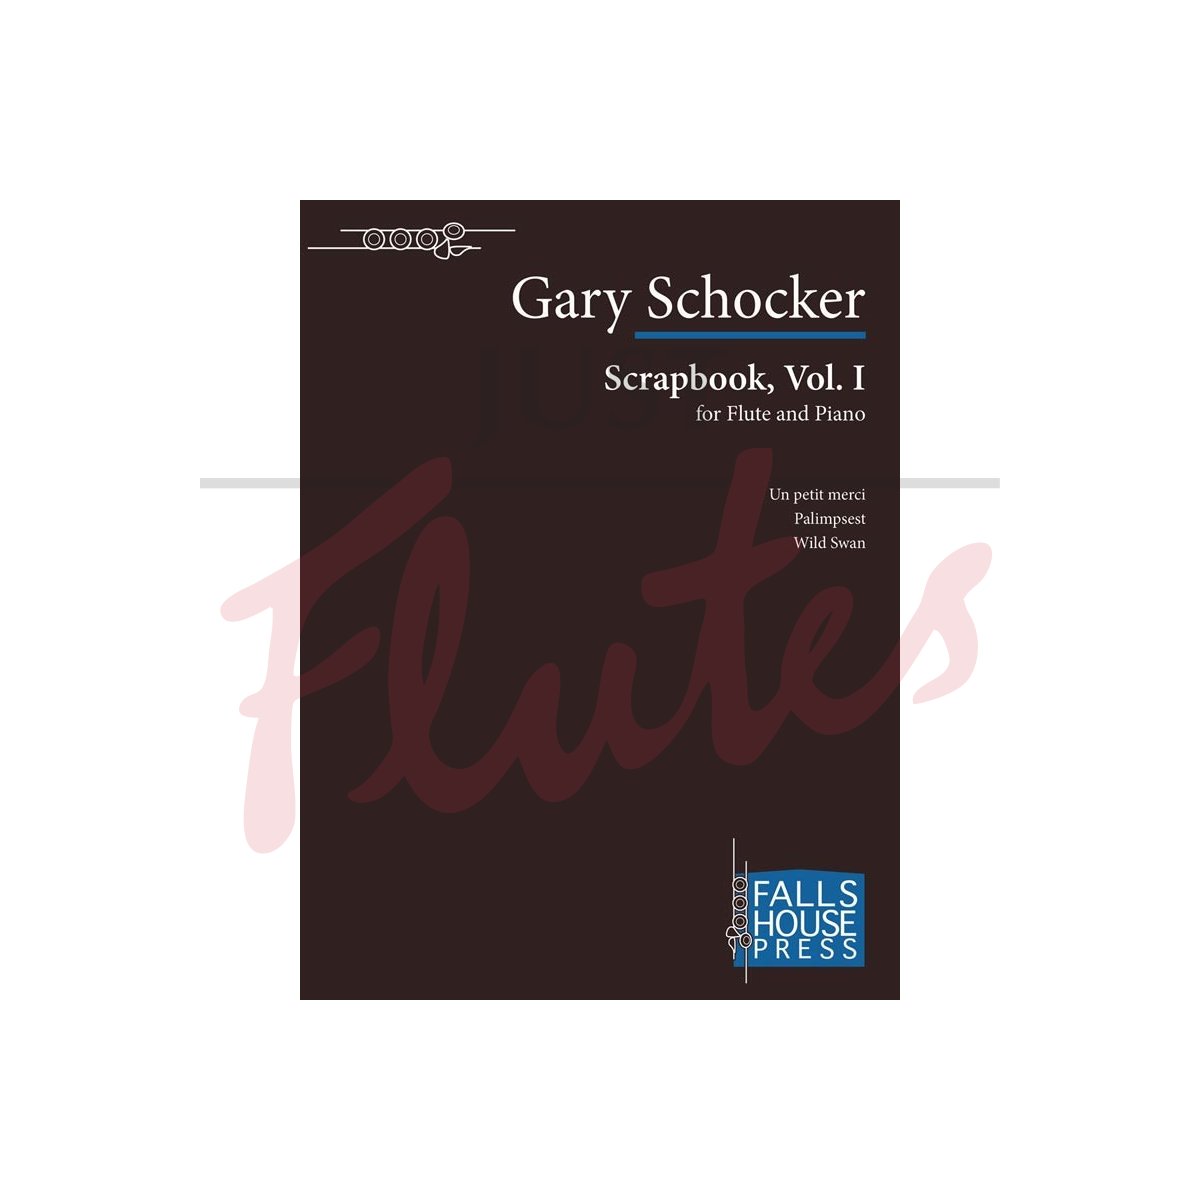 Scrapbook Volume 1 for Flute and Piano